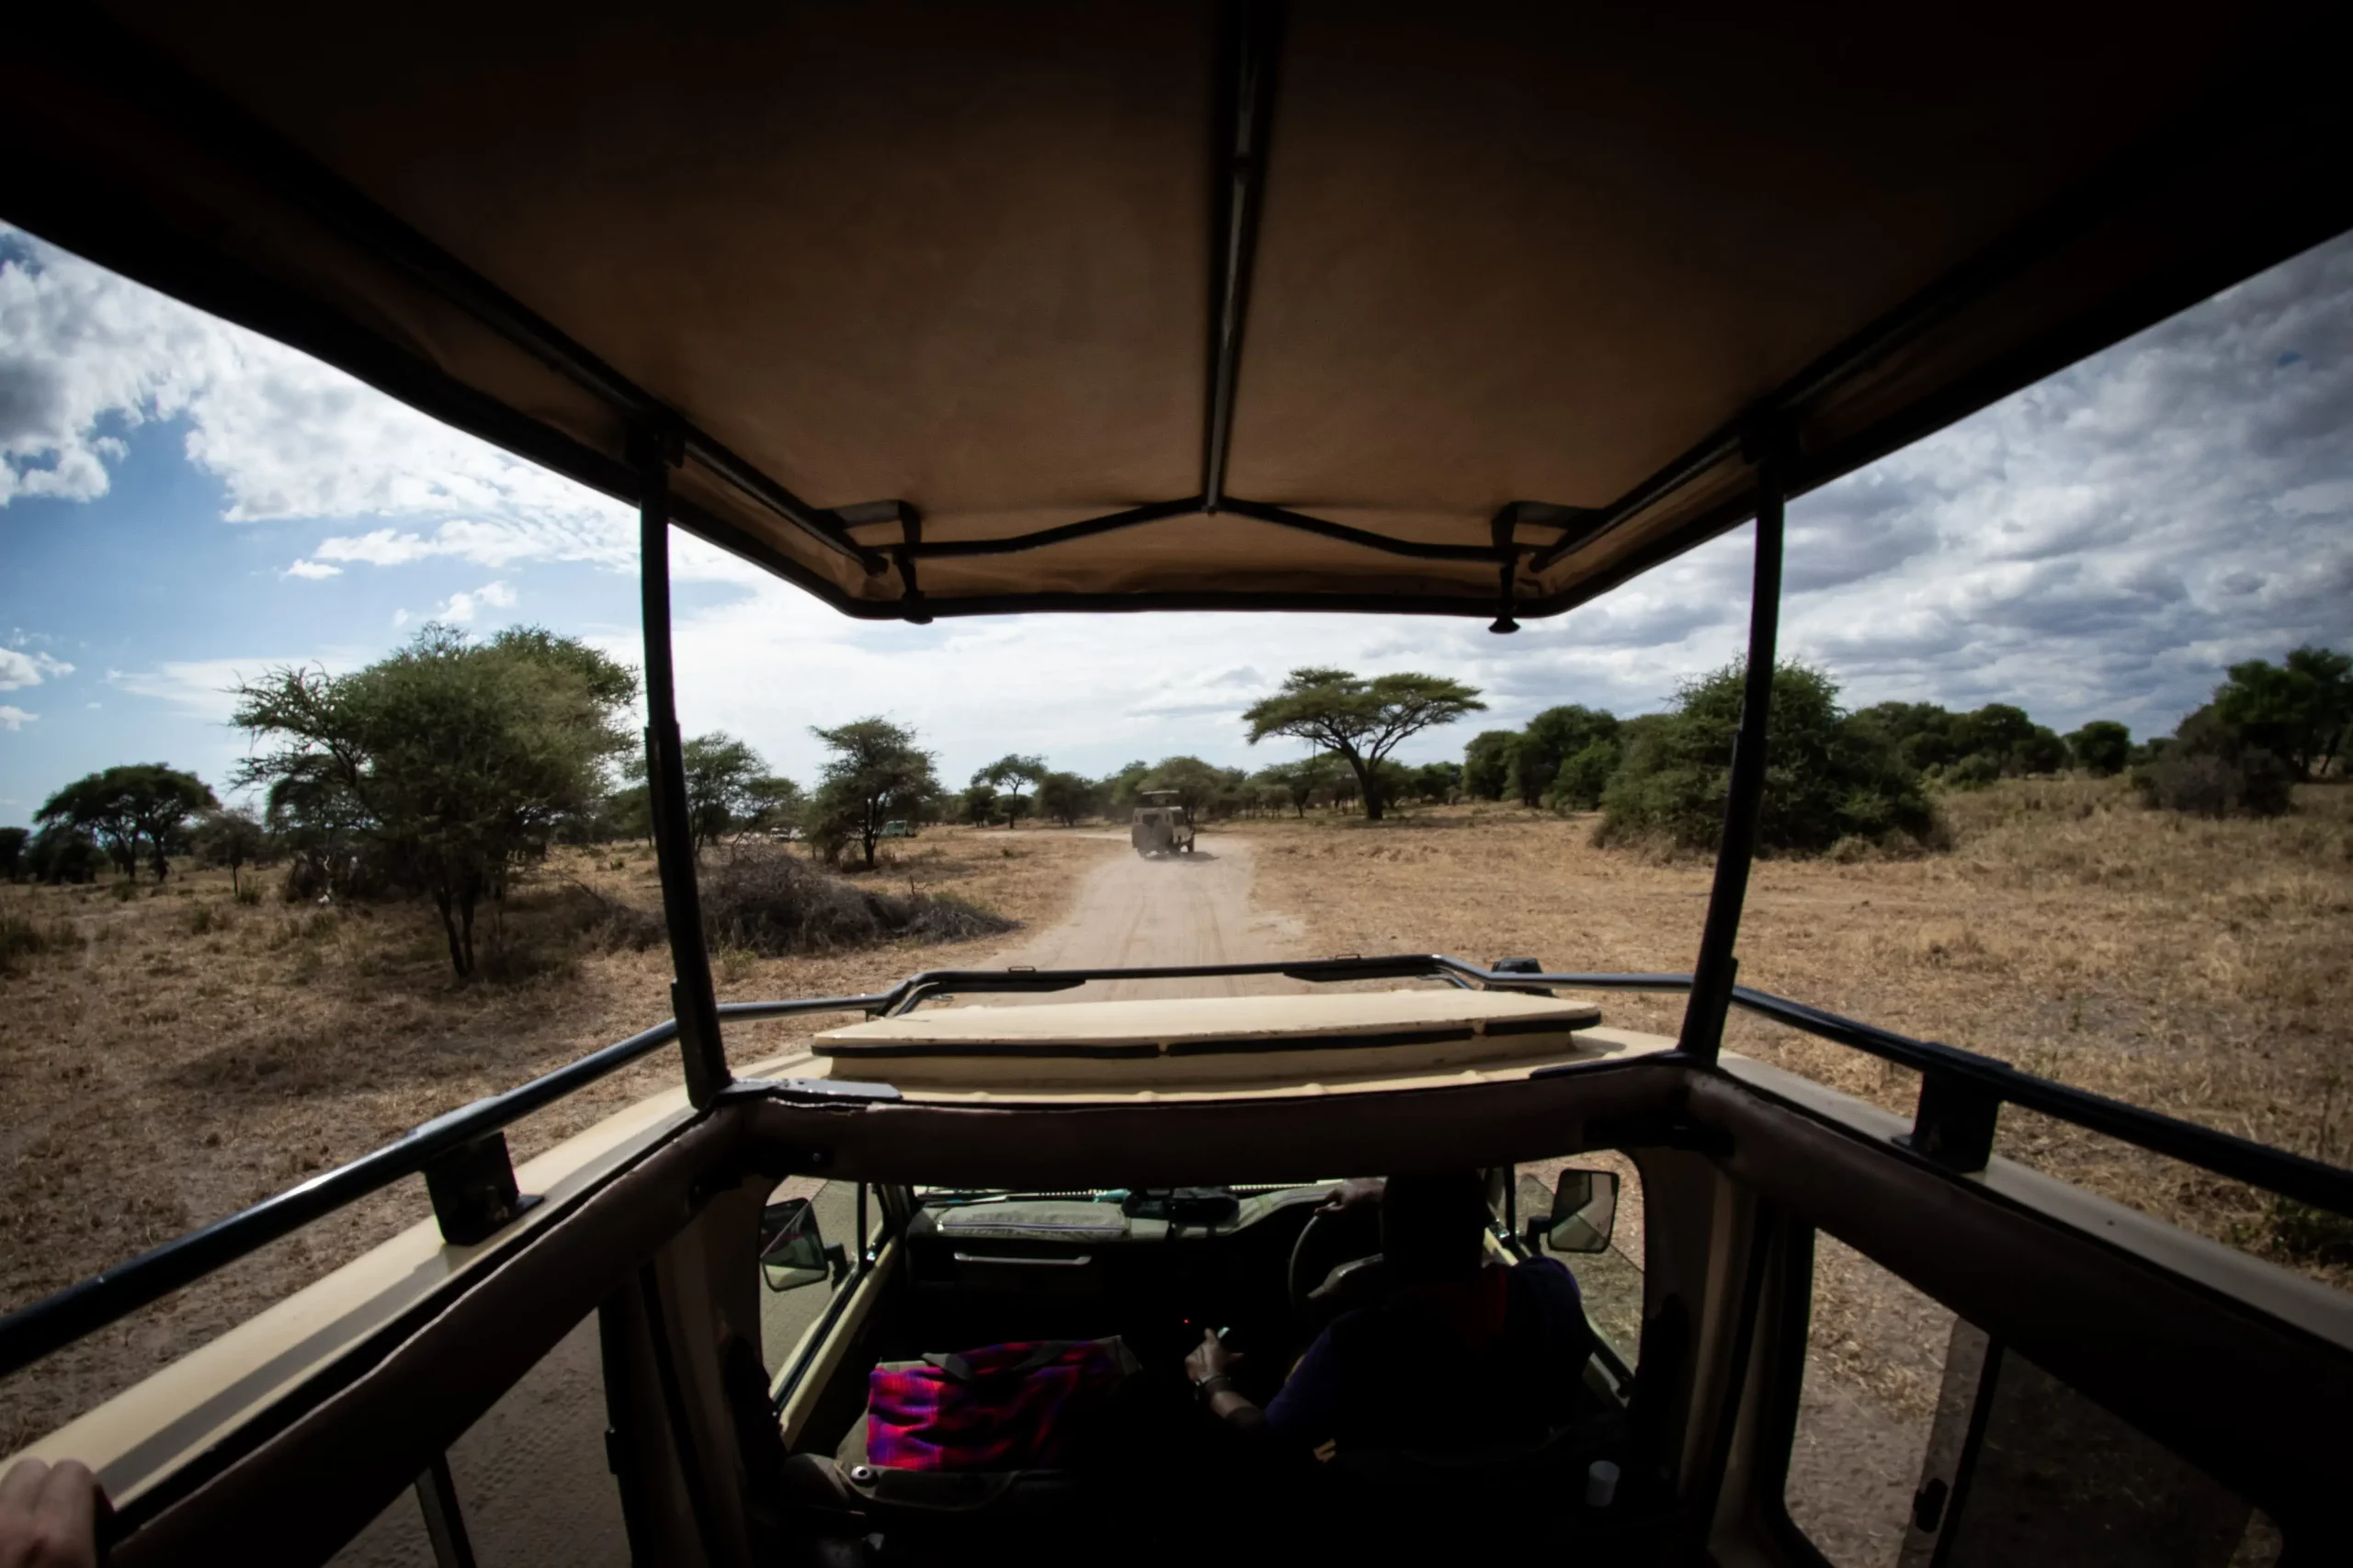 The front view from safari vehicle's drivers POV